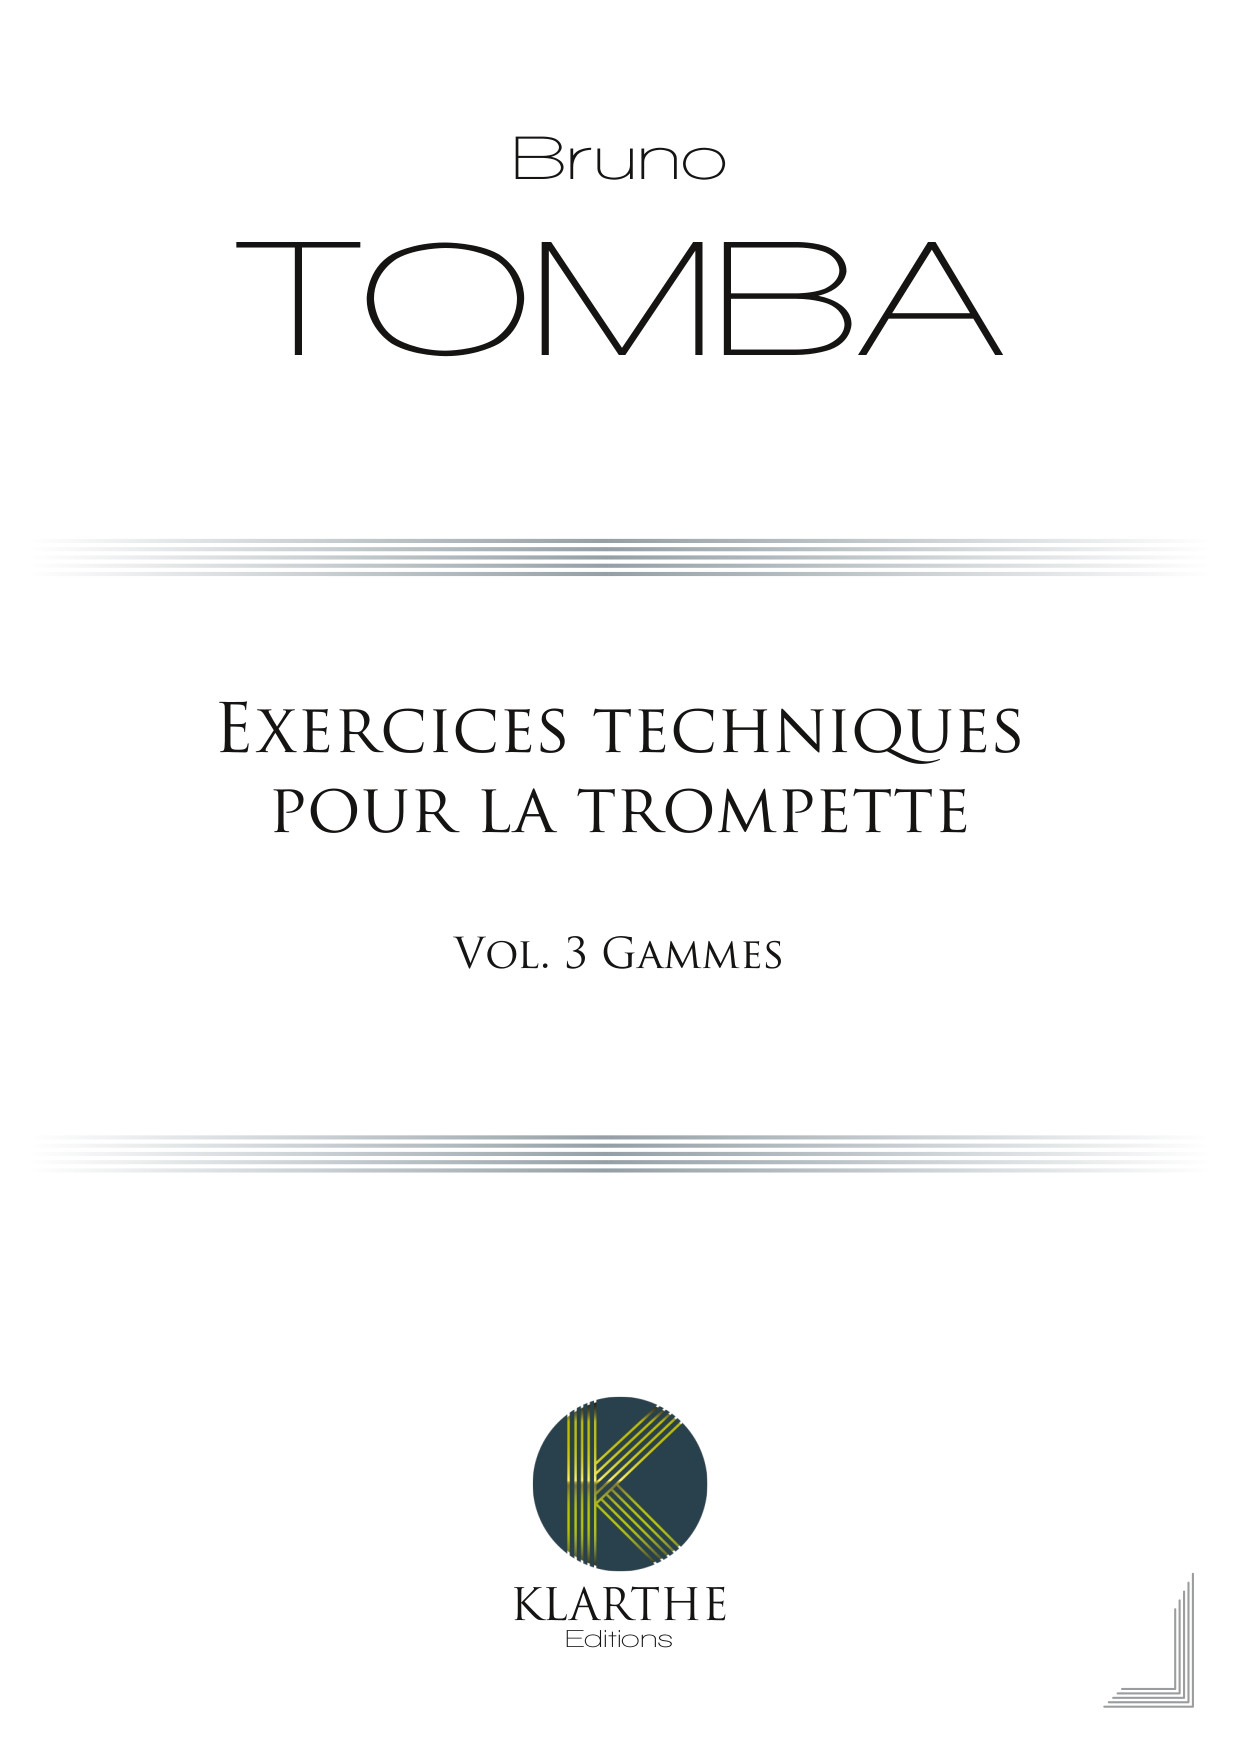 Exercices techniques ? Vol.3 Gammes (TOMBA BRUNO)